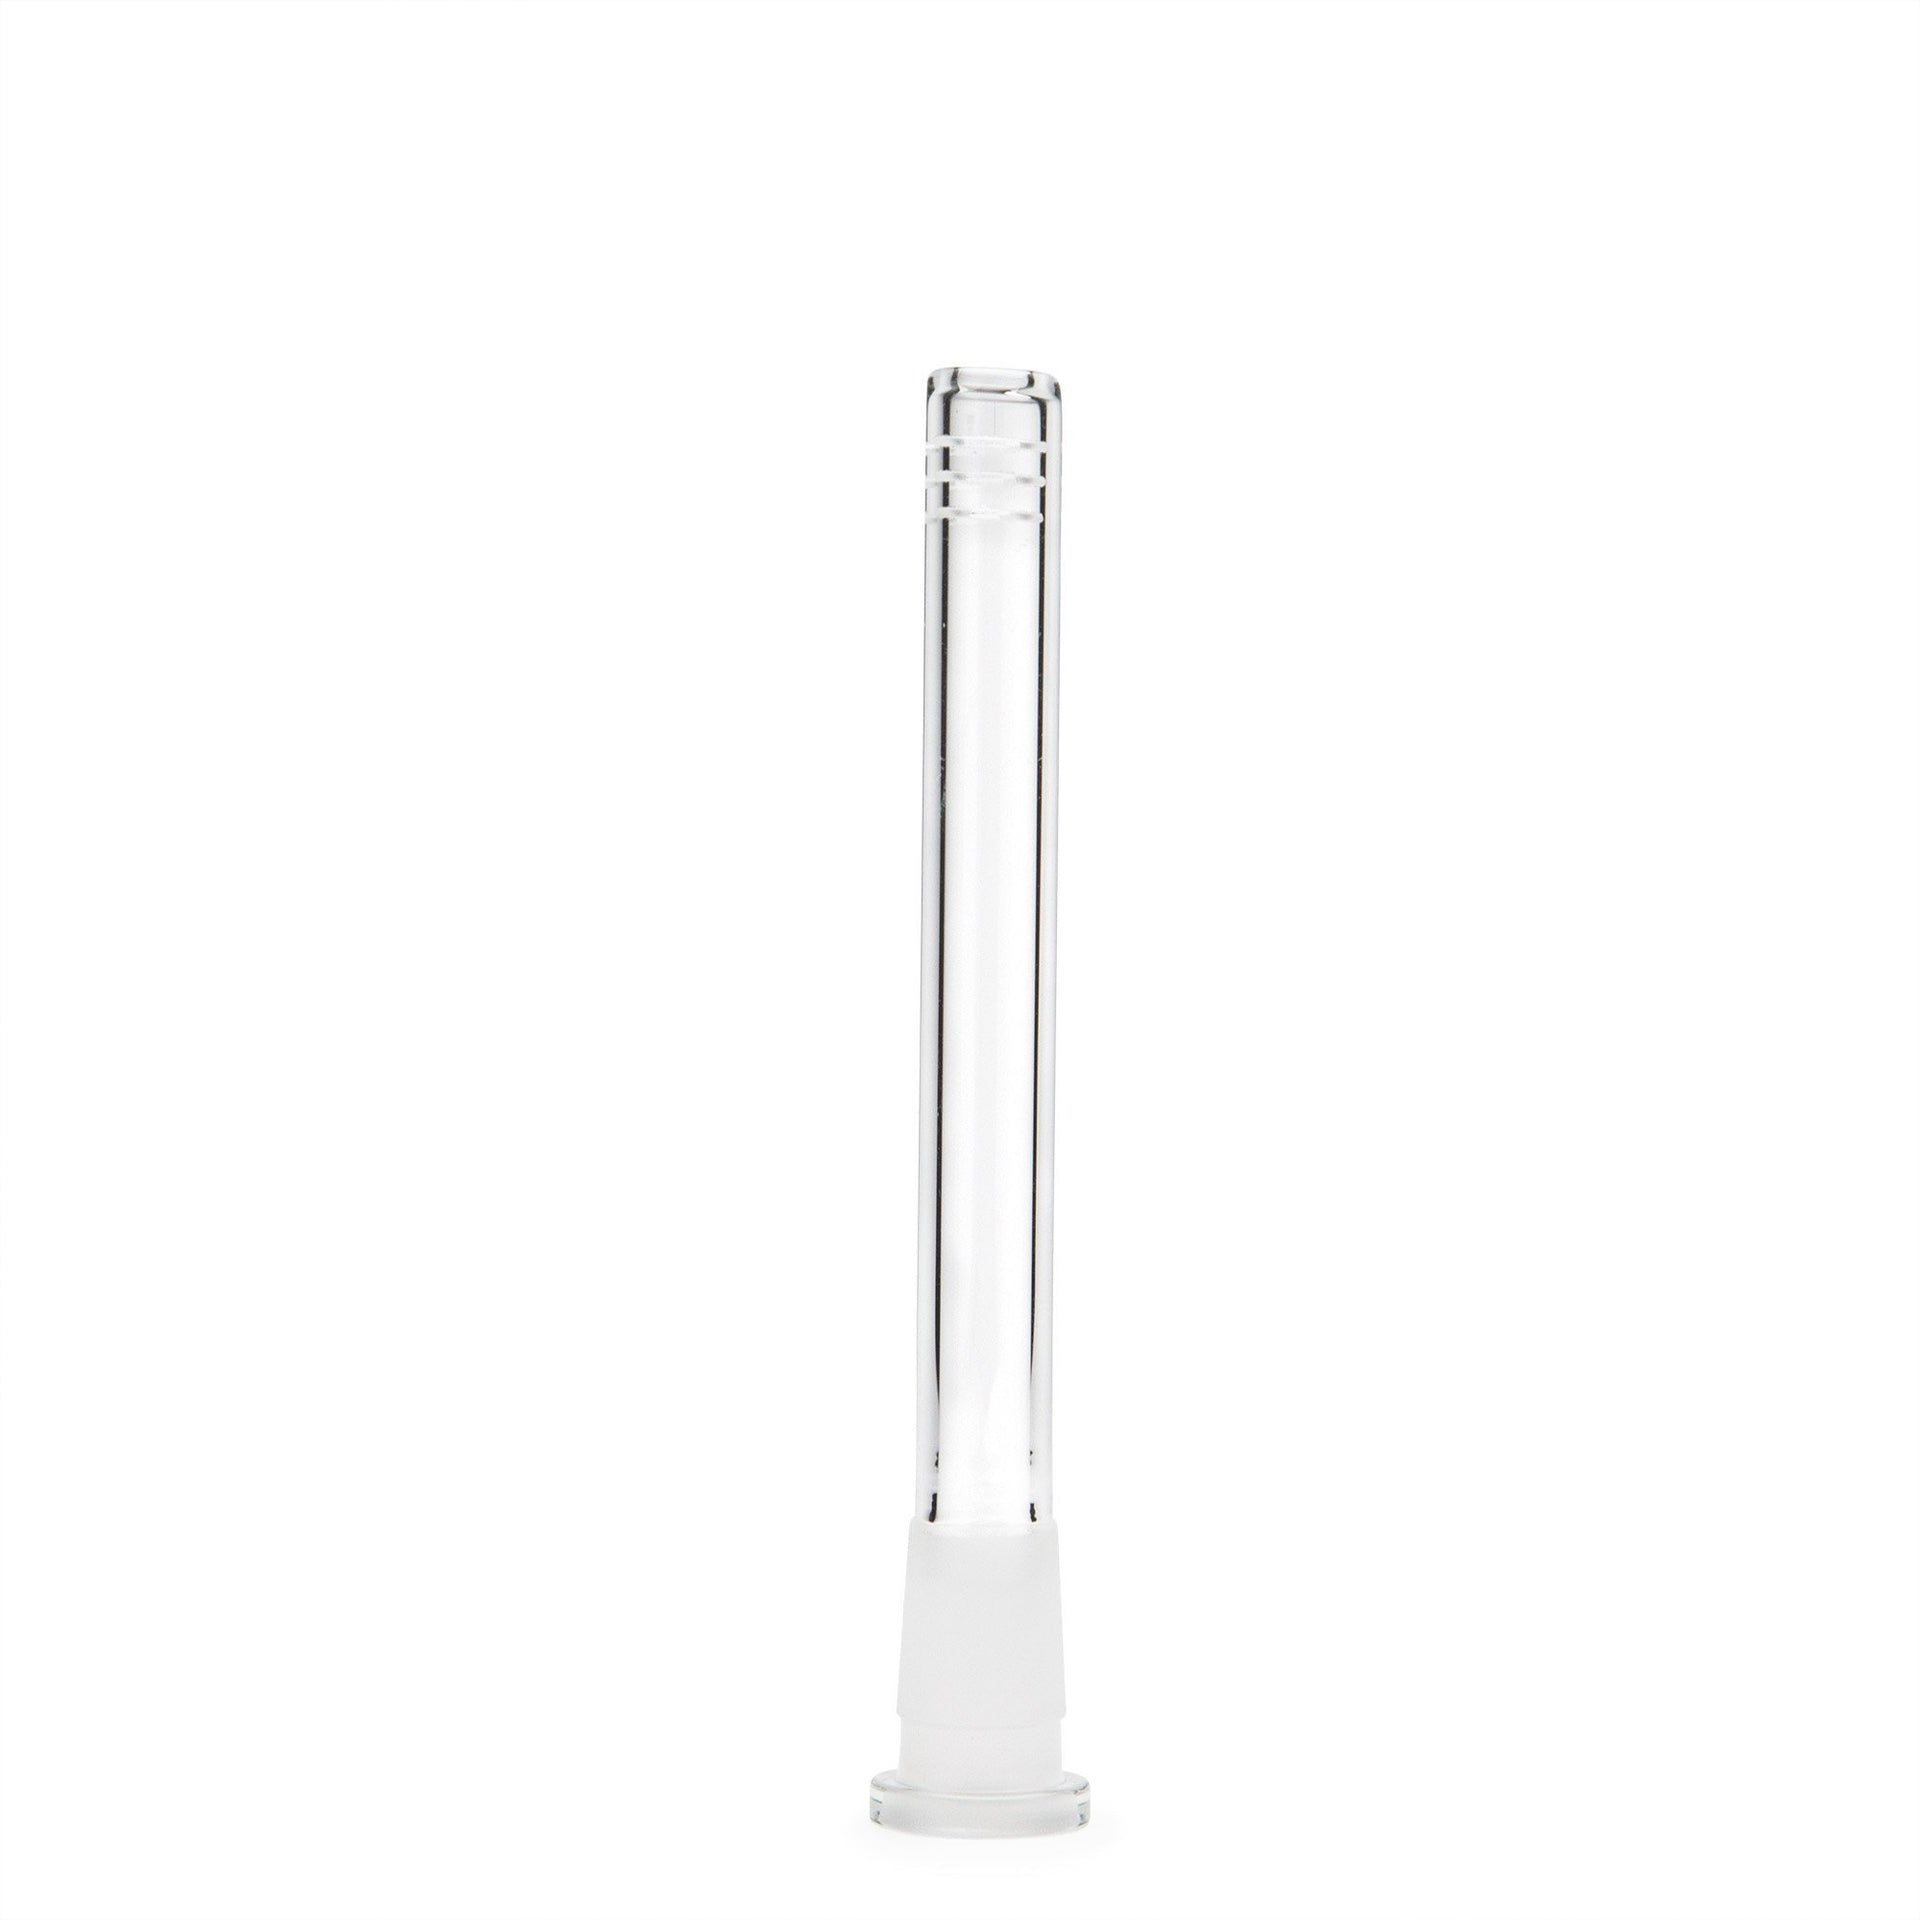 Low Profile Diffused Downstem - 420 Science - The most trusted online smoke shop.